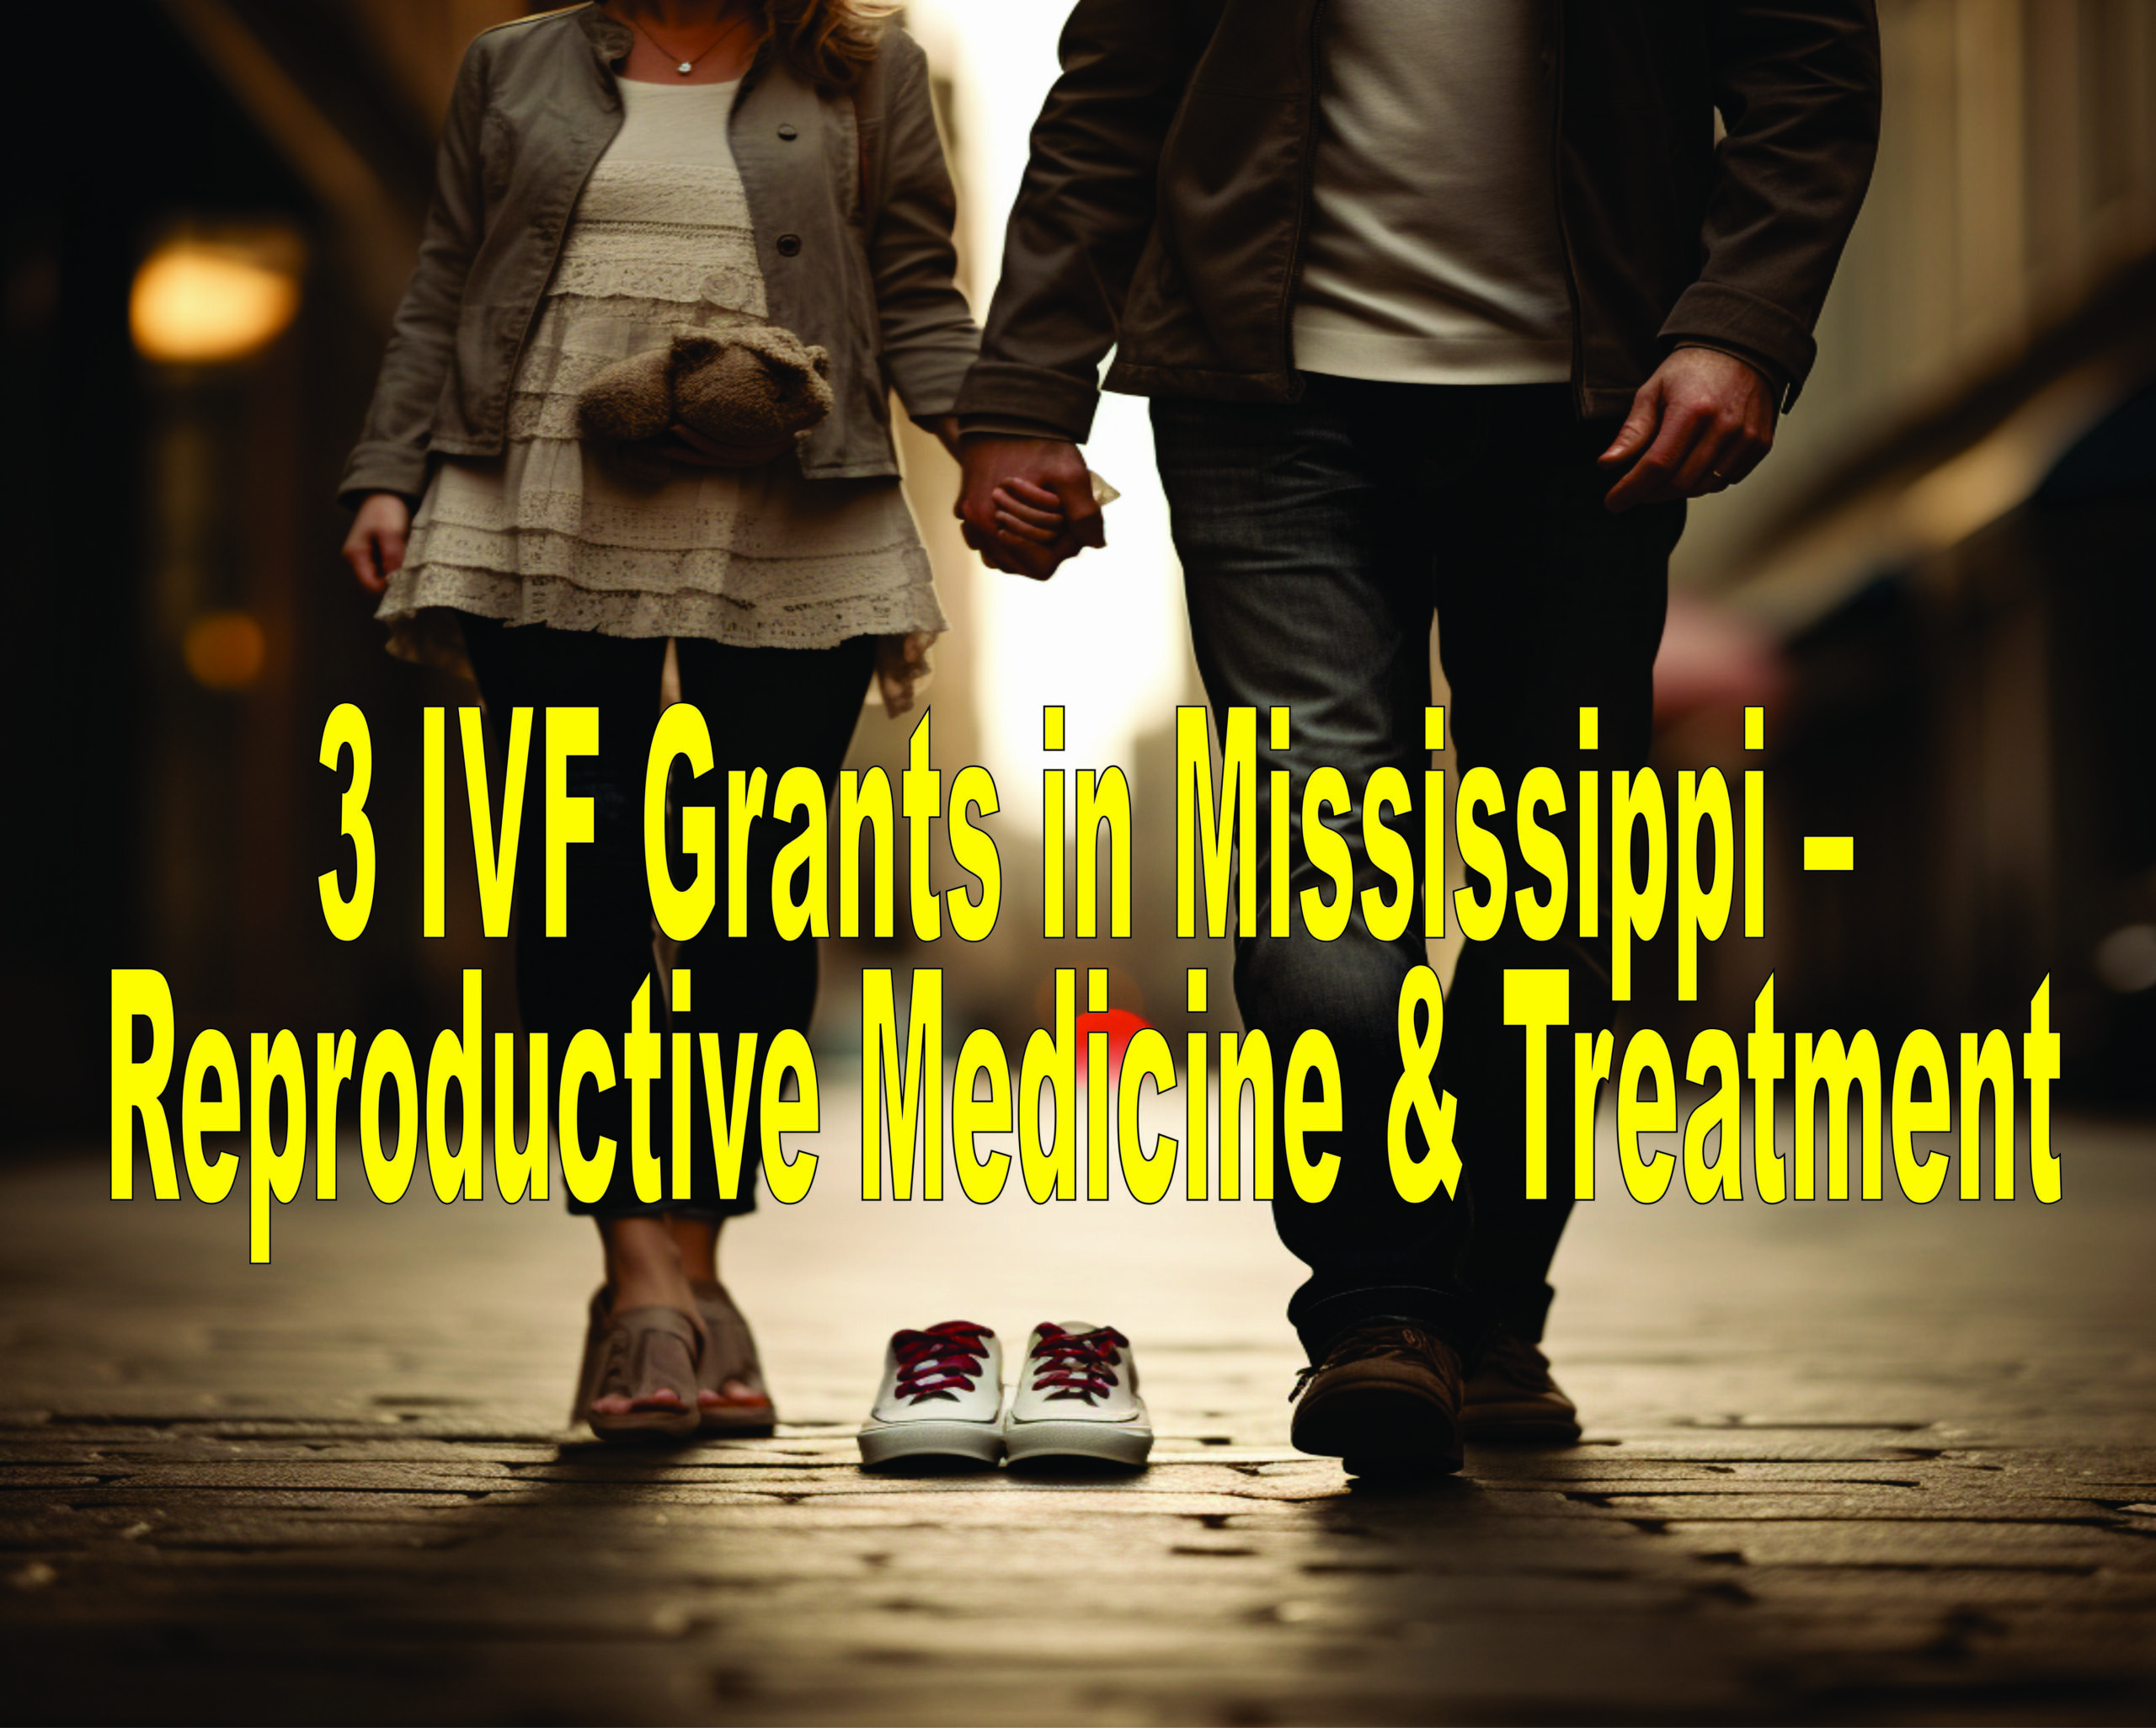 3 Ivf Grants In Mississippi – Reproductive Medicine & Treatment